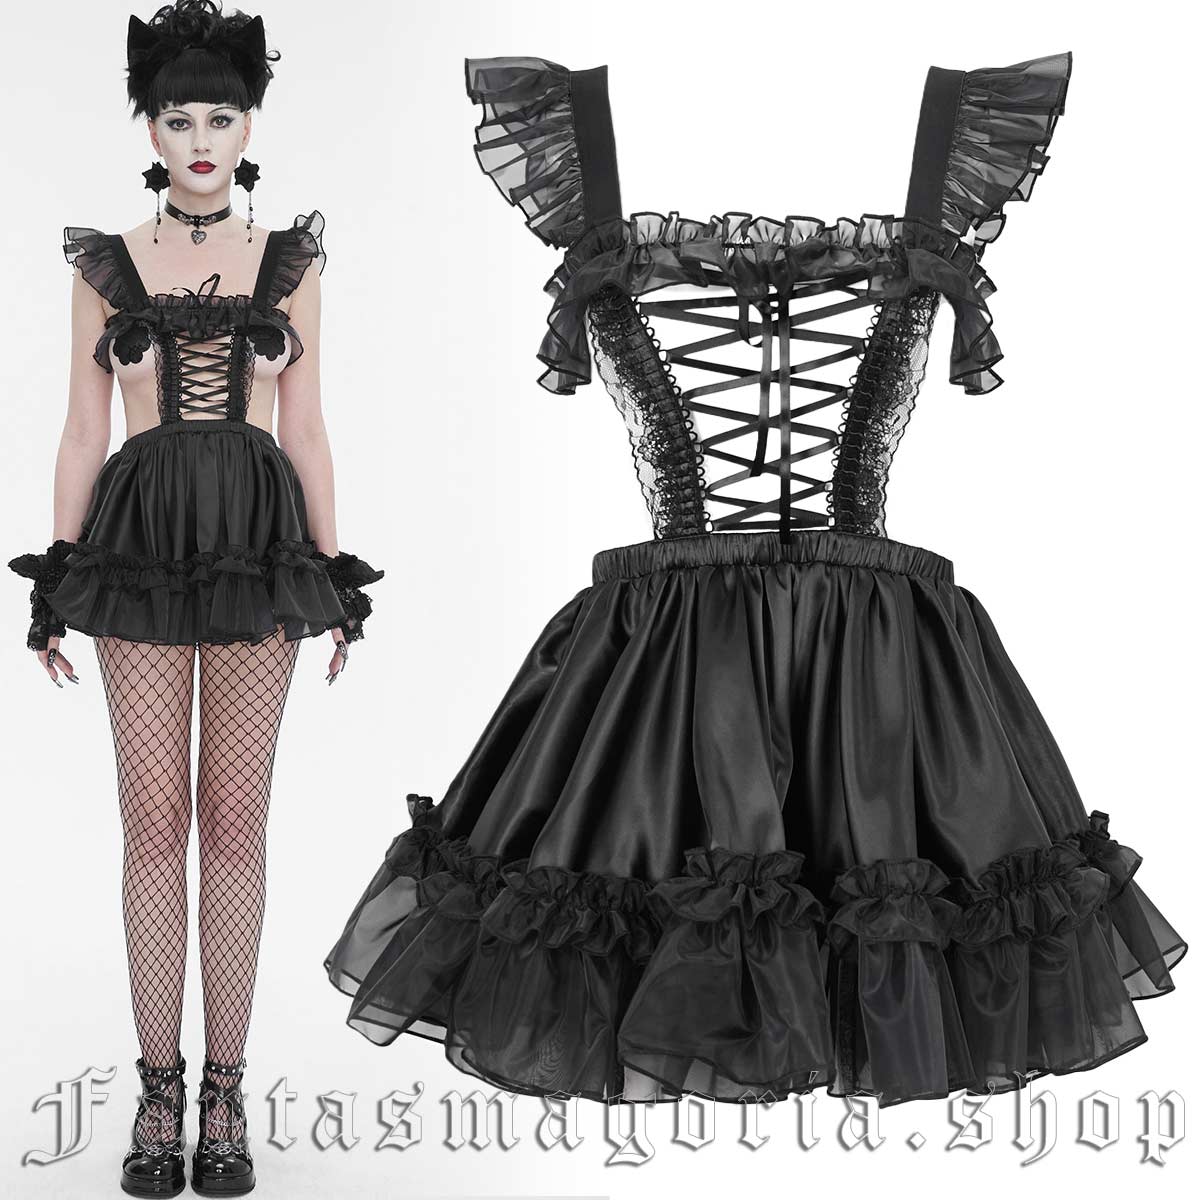 Women’s Gothic black satin and chiffon frilly lace-up front lingerie mini full skirt pinafore dress. - Devil Fashion - SX023